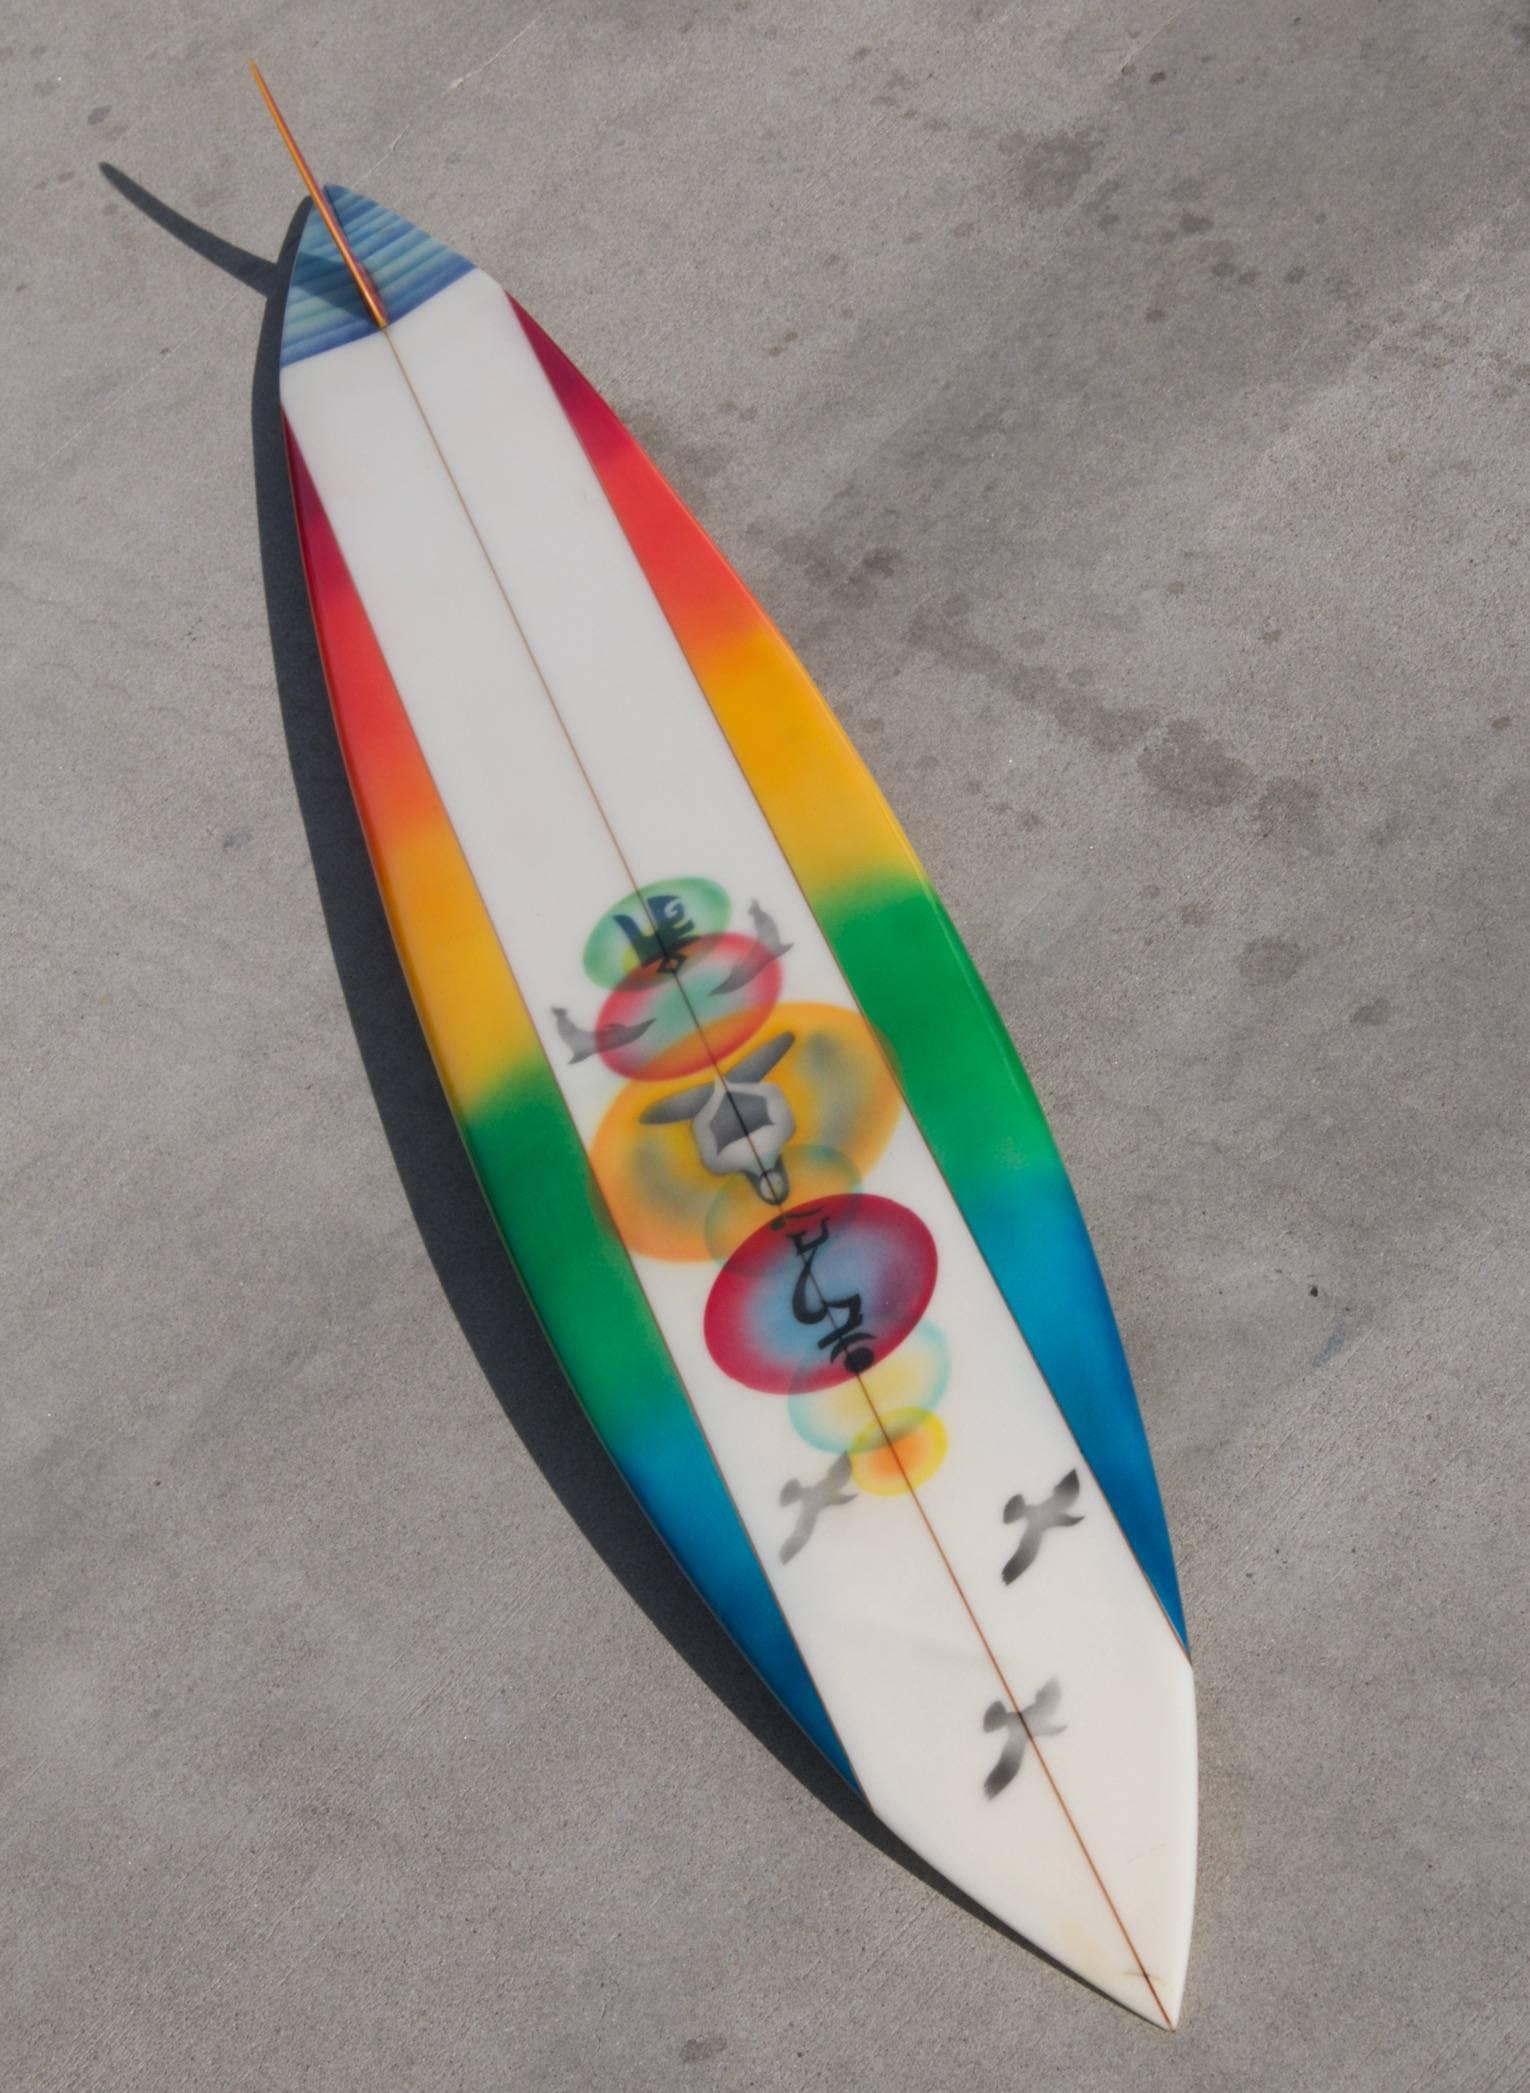 This brand new Mike Hynson hand shaped Rainbow big wave gun surfboard, incorporates an original 1960s rainbow logo and is enhanced with artwork by Eilers who offers up a rainbow spectrum of vibrant color and graphics on a tremendous shape that might